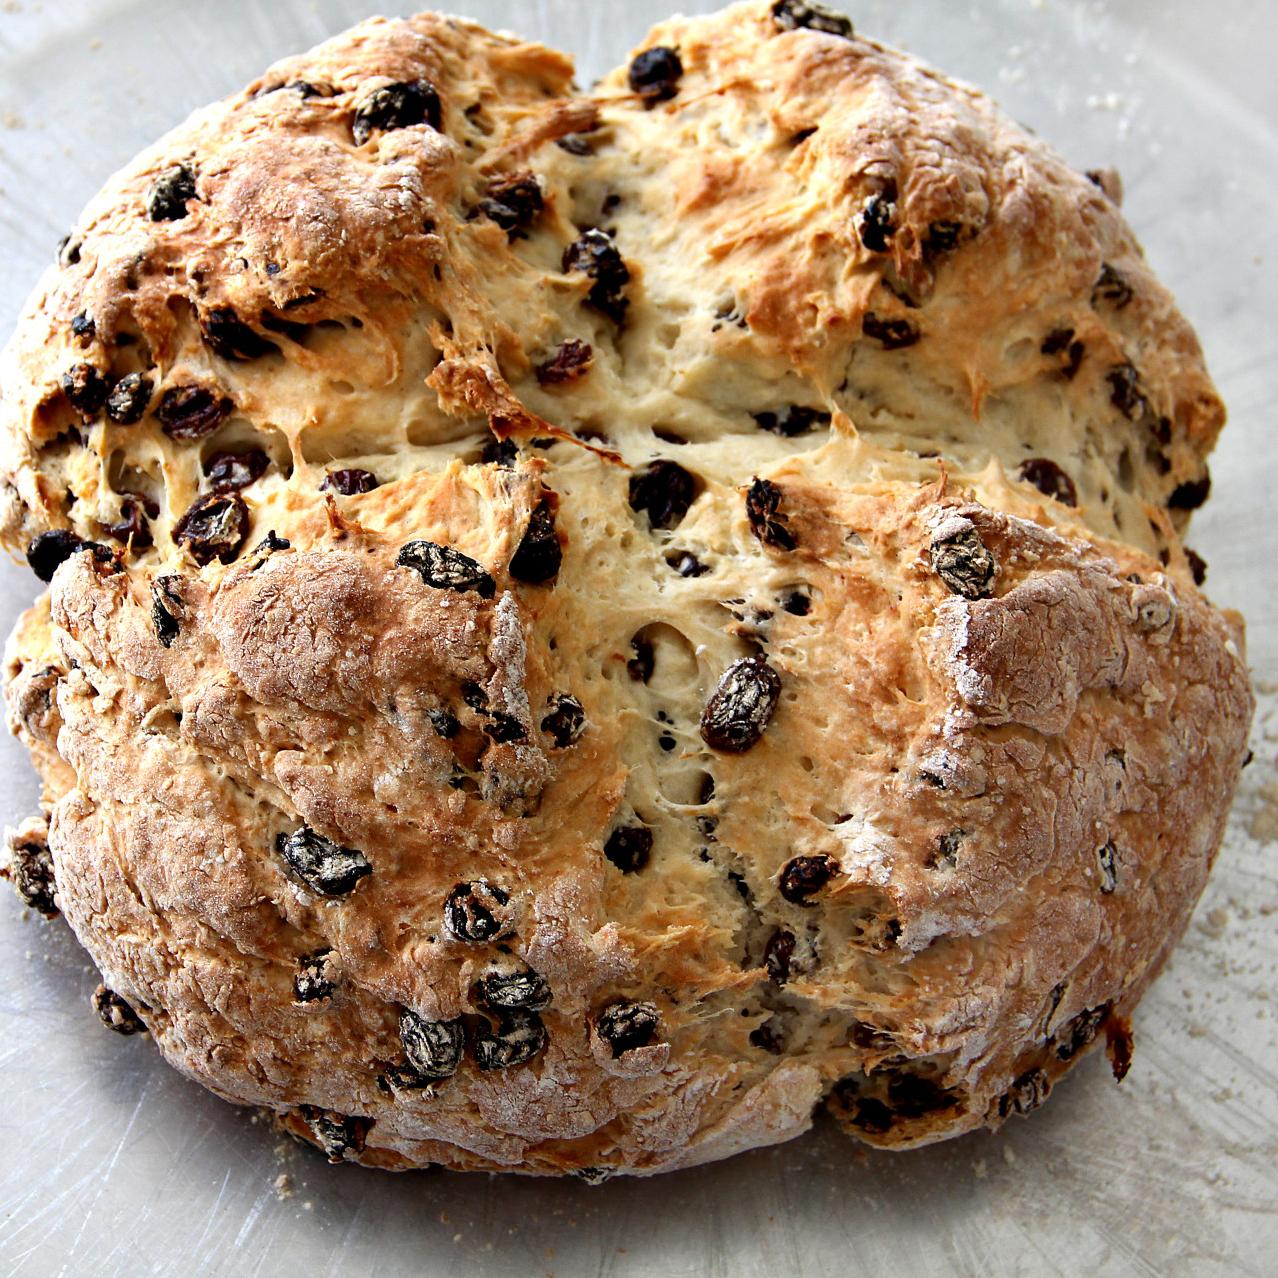  This recipe combines the rich flavors of whiskey with the classic taste of traditional soda bread.